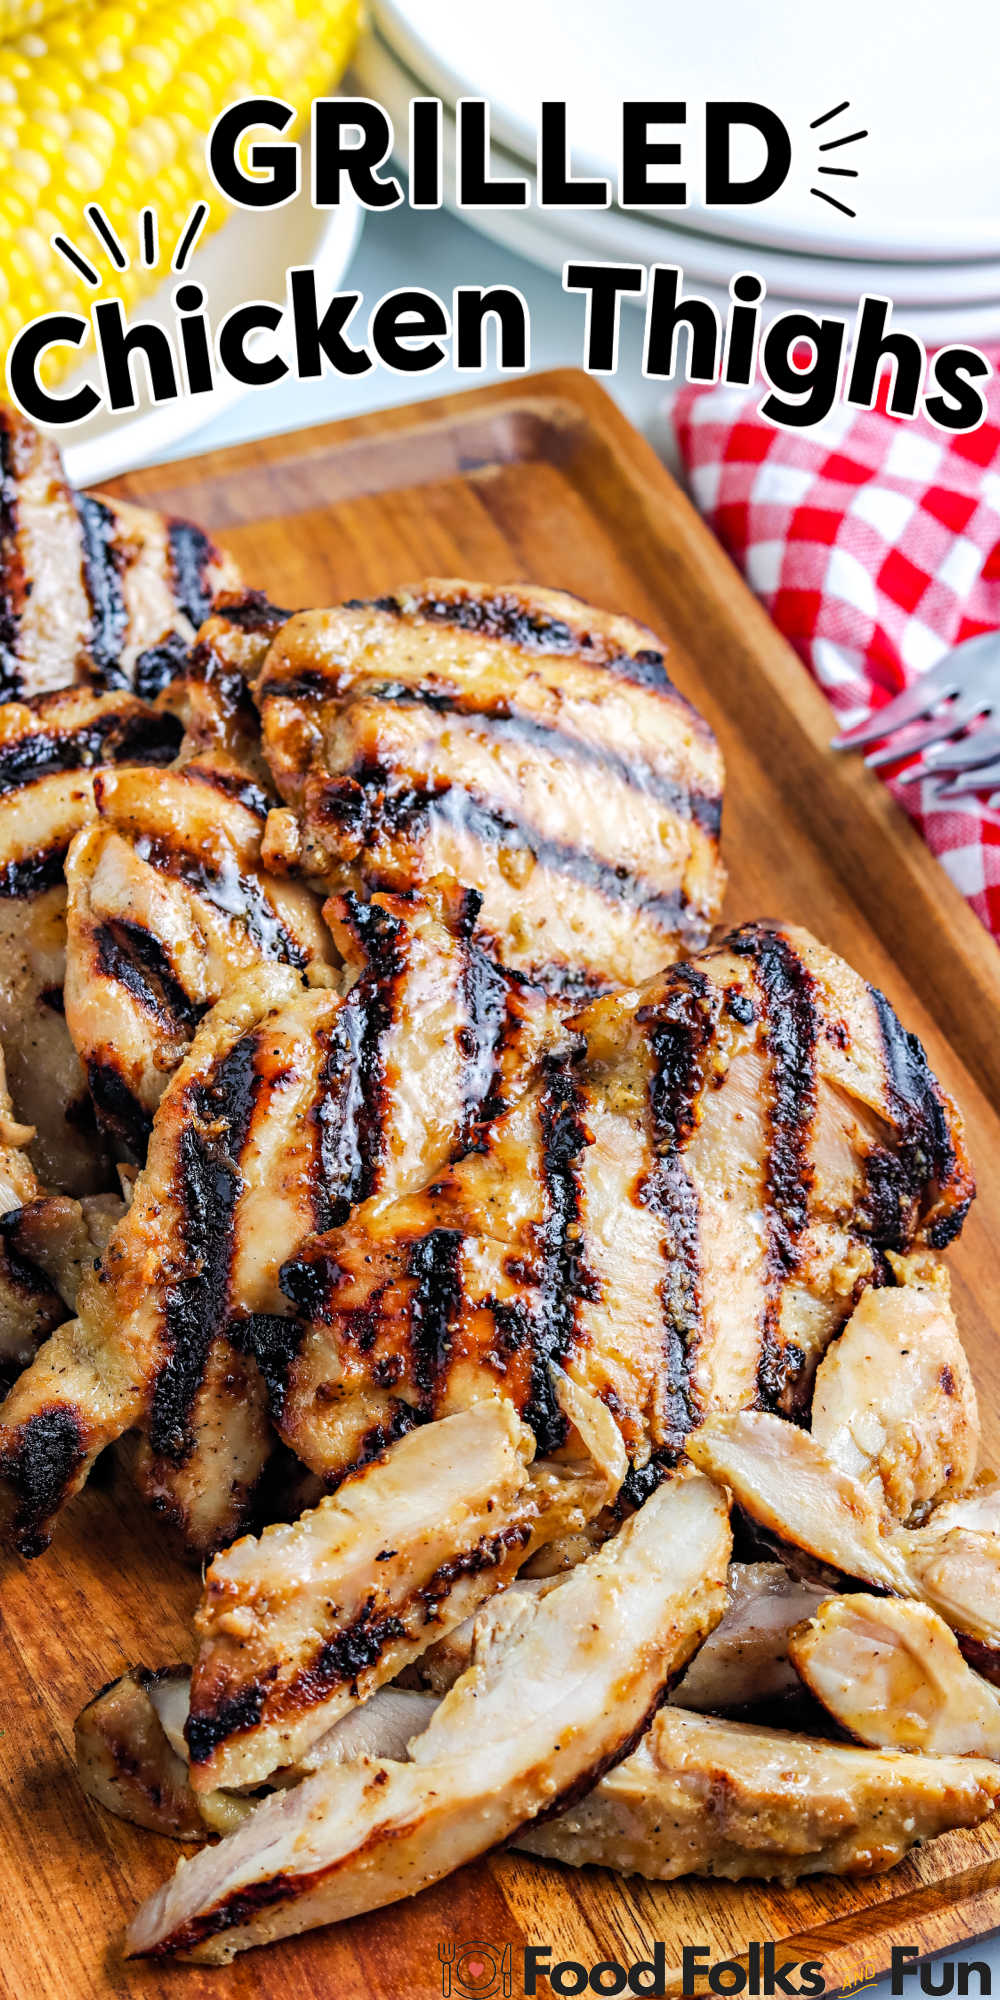 This Grilled Boneless Chicken Thighs recipe makes the juiciest and most succulent chicken thighs you’ll ever all due to the tasty chicken thigh marinade. via @foodfolksandfun